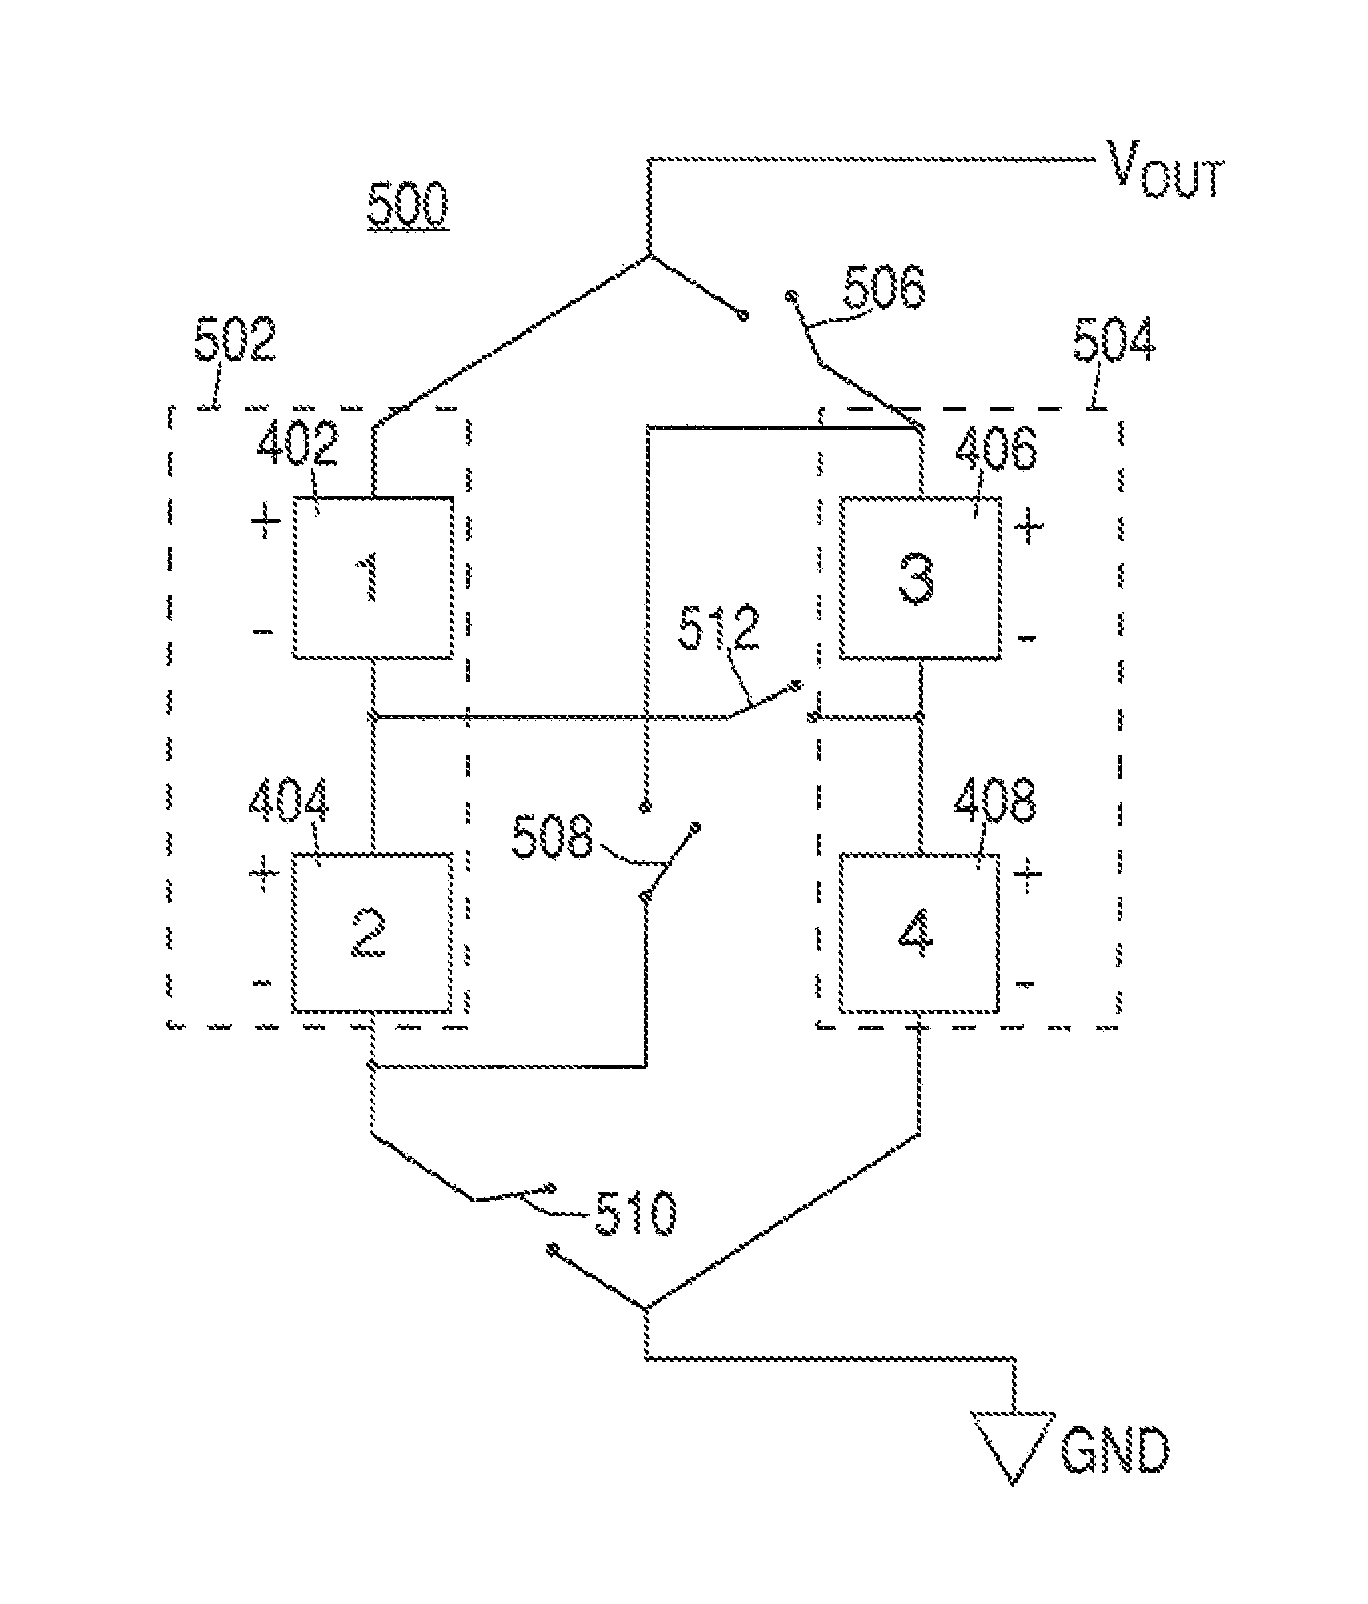 Power management circuitry and solar cells